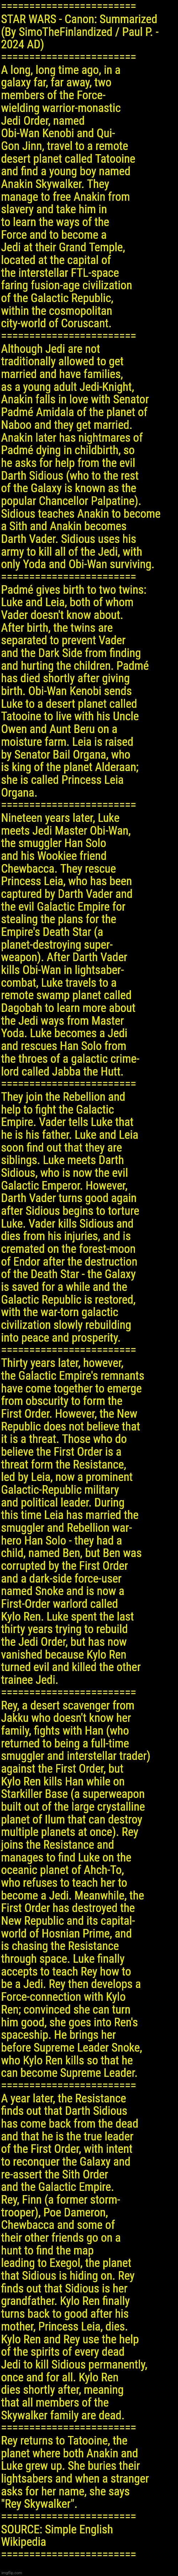 STAR WARS - Canon: Summarized (By SimoTheFinlandized / Paul P. - 2024 AD) | ========================
STAR WARS - Canon: Summarized 
(By SimoTheFinlandized / Paul P. -
2024 AD)
========================
A long, long time ago, in a 
galaxy far, far away, two 
members of the Force-
wielding warrior-monastic 
Jedi Order, named 
Obi-Wan Kenobi and Qui-
Gon Jinn, travel to a remote 
desert planet called Tatooine 
and find a young boy named 
Anakin Skywalker. They 
manage to free Anakin from 
slavery and take him in 
to learn the ways of the 
Force and to become a 
Jedi at their Grand Temple, 
located at the capital of 
the interstellar FTL-space
faring fusion-age civilization 
of the Galactic Republic, 
within the cosmopolitan 
city-world of Coruscant.
========================
Although Jedi are not 
traditionally allowed to get 
married and have families, 
as a young adult Jedi-Knight, 
Anakin falls in love with Senator 
Padmé Amidala of the planet of 
Naboo and they get married. 
Anakin later has nightmares of 
Padmé dying in childbirth, so 
he asks for help from the evil 
Darth Sidious (who to the rest 
of the Galaxy is known as the 
popular Chancellor Palpatine). 
Sidious teaches Anakin to become 
a Sith and Anakin becomes 
Darth Vader. Sidious uses his 
army to kill all of the Jedi, with 
only Yoda and Obi-Wan surviving.
========================
Padmé gives birth to two twins: 
Luke and Leia, both of whom 
Vader doesn't know about. 
After birth, the twins are 
separated to prevent Vader 
and the Dark Side from finding 
and hurting the children. Padmé 
has died shortly after giving 
birth. Obi-Wan Kenobi sends 
Luke to a desert planet called 
Tatooine to live with his Uncle 
Owen and Aunt Beru on a 
moisture farm. Leia is raised 
by Senator Bail Organa, who 
is king of the planet Alderaan; 
she is called Princess Leia 
Organa.
========================
Nineteen years later, Luke 
meets Jedi Master Obi-Wan, 
the smuggler Han Solo 
and his Wookiee friend 
Chewbacca. They rescue 
Princess Leia, who has been 
captured by Darth Vader and 
the evil Galactic Empire for 
stealing the plans for the 
Empire's Death Star (a 
planet-destroying super-
weapon). After Darth Vader 
kills Obi-Wan in lightsaber-
combat, Luke travels to a 
remote swamp planet called 
Dagobah to learn more about
the Jedi ways from Master 
Yoda. Luke becomes a Jedi 
and rescues Han Solo from 
the throes of a galactic crime-
lord called Jabba the Hutt.
========================
They join the Rebellion and 
help to fight the Galactic 
Empire. Vader tells Luke that 
he is his father. Luke and Leia 
soon find out that they are 
siblings. Luke meets Darth 
Sidious, who is now the evil 
Galactic Emperor. However, 
Darth Vader turns good again 
after Sidious begins to torture 
Luke. Vader kills Sidious and 
dies from his injuries, and is 
cremated on the forest-moon 
of Endor after the destruction
of the Death Star - the Galaxy 
is saved for a while and the 
Galactic Republic is restored,
with the war-torn galactic 
civilization slowly rebuilding 
into peace and prosperity.
========================
Thirty years later, however, 
the Galactic Empire's remnants 
have come together to emerge 
from obscurity to form the 
First Order. However, the New 
Republic does not believe that 
it is a threat. Those who do 
believe the First Order is a 
threat form the Resistance, 
led by Leia, now a prominent 
Galactic-Republic military 
and political leader. During 
this time Leia has married the 
smuggler and Rebellion war-
hero Han Solo - they had a 
child, named Ben, but Ben was 
corrupted by the First Order 
and a dark-side force-user 
named Snoke and is now a 
First-Order warlord called 
Kylo Ren. Luke spent the last 
thirty years trying to rebuild 
the Jedi Order, but has now 
vanished because Kylo Ren 
turned evil and killed the other 
trainee Jedi.
========================
Rey, a desert scavenger from 
Jakku who doesn't know her 
family, fights with Han (who 
returned to being a full-time 
smuggler and interstellar trader) 
against the First Order, but 
Kylo Ren kills Han while on 
Starkiller Base (a superweapon 
built out of the large crystalline 
planet of Ilum that can destroy 
multiple planets at once). Rey 
joins the Resistance and 
manages to find Luke on the 
oceanic planet of Ahch-To, 
who refuses to teach her to 
become a Jedi. Meanwhile, the 
First Order has destroyed the 
New Republic and its capital-
world of Hosnian Prime, and 
is chasing the Resistance 
through space. Luke finally 
accepts to teach Rey how to 
be a Jedi. Rey then develops a
Force-connection with Kylo 
Ren; convinced she can turn 
him good, she goes into Ren's 
spaceship. He brings her 
before Supreme Leader Snoke, 
who Kylo Ren kills so that he 
can become Supreme Leader.
========================
A year later, the Resistance 
finds out that Darth Sidious 
has come back from the dead 
and that he is the true leader 
of the First Order, with intent 
to reconquer the Galaxy and 
re-assert the Sith Order 
and the Galactic Empire. 
Rey, Finn (a former storm-
trooper), Poe Dameron, 
Chewbacca and some of 
their other friends go on a 
hunt to find the map 
leading to Exegol, the planet 
that Sidious is hiding on. Rey 
finds out that Sidious is her 
grandfather. Kylo Ren finally 
turns back to good after his 
mother, Princess Leia, dies. 
Kylo Ren and Rey use the help 
of the spirits of every dead 
Jedi to kill Sidious permanently, 
once and for all. Kylo Ren 
dies shortly after, meaning 
that all members of the 
Skywalker family are dead.
========================
Rey returns to Tatooine, the 
planet where both Anakin and 
Luke grew up. She buries their 
lightsabers and when a stranger 
asks for her name, she says 
"Rey Skywalker".
========================
SOURCE: Simple English 
Wikipedia
======================== | image tagged in simothefinlandized,star wars,canon,science fiction,fantasy,movies and tv | made w/ Imgflip meme maker